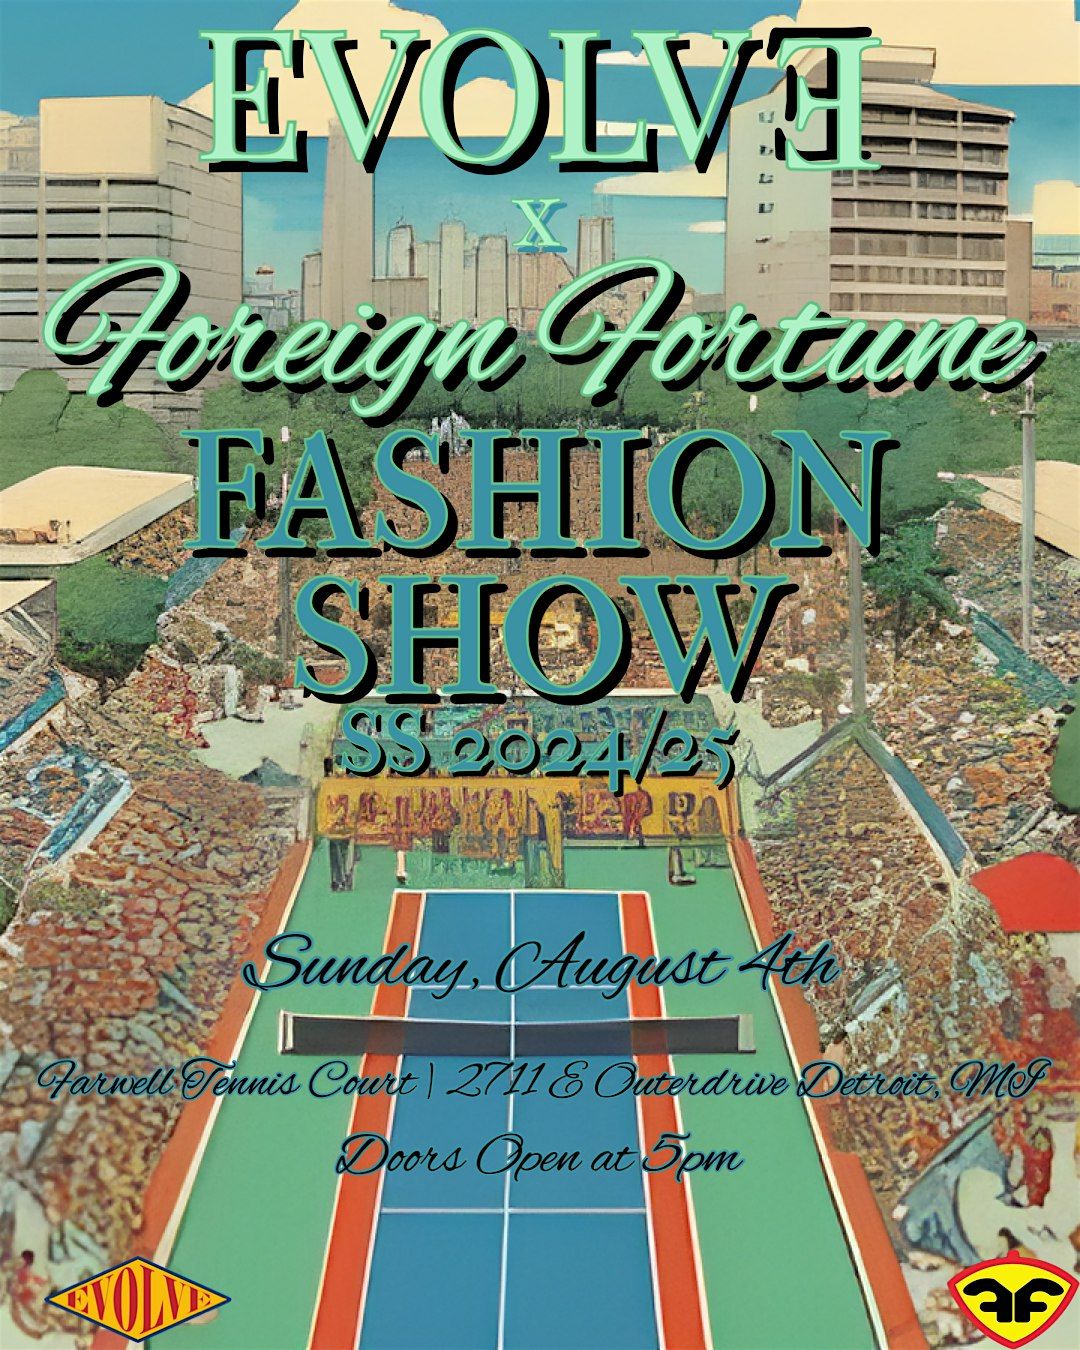 EVOLVE x Foreign Fortune Fashion Show